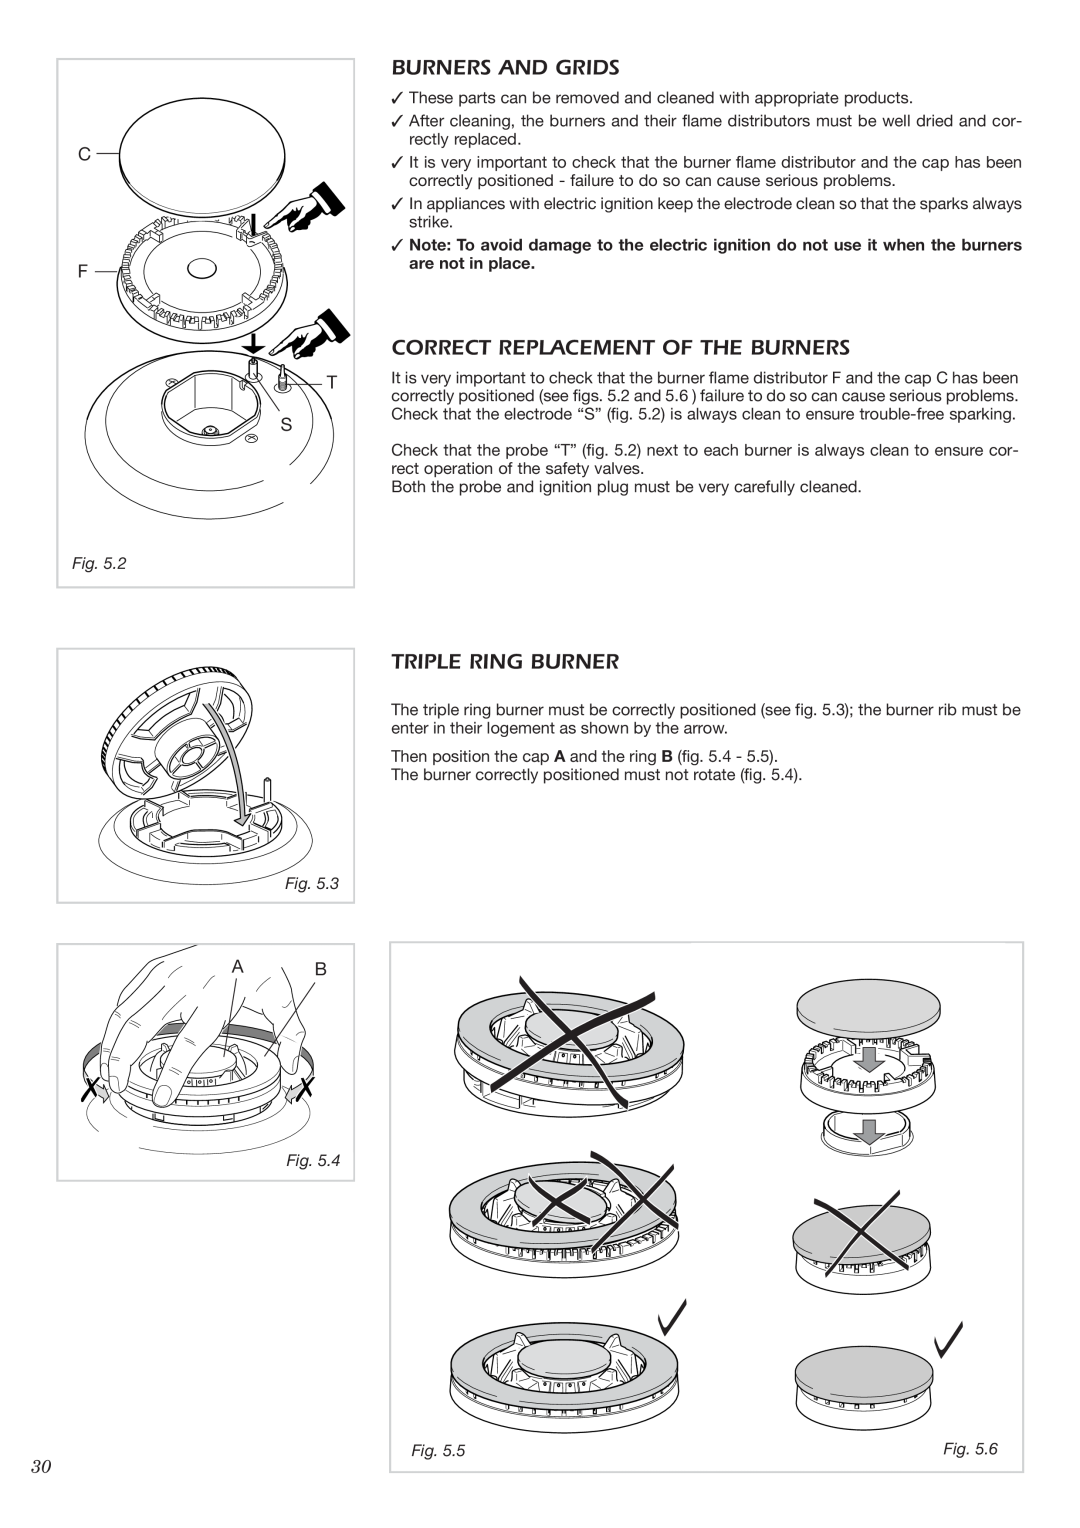 CDA HCC360 manual Burners And Grids, Correct Replacement Of The Burners, Triple Ring Burner 